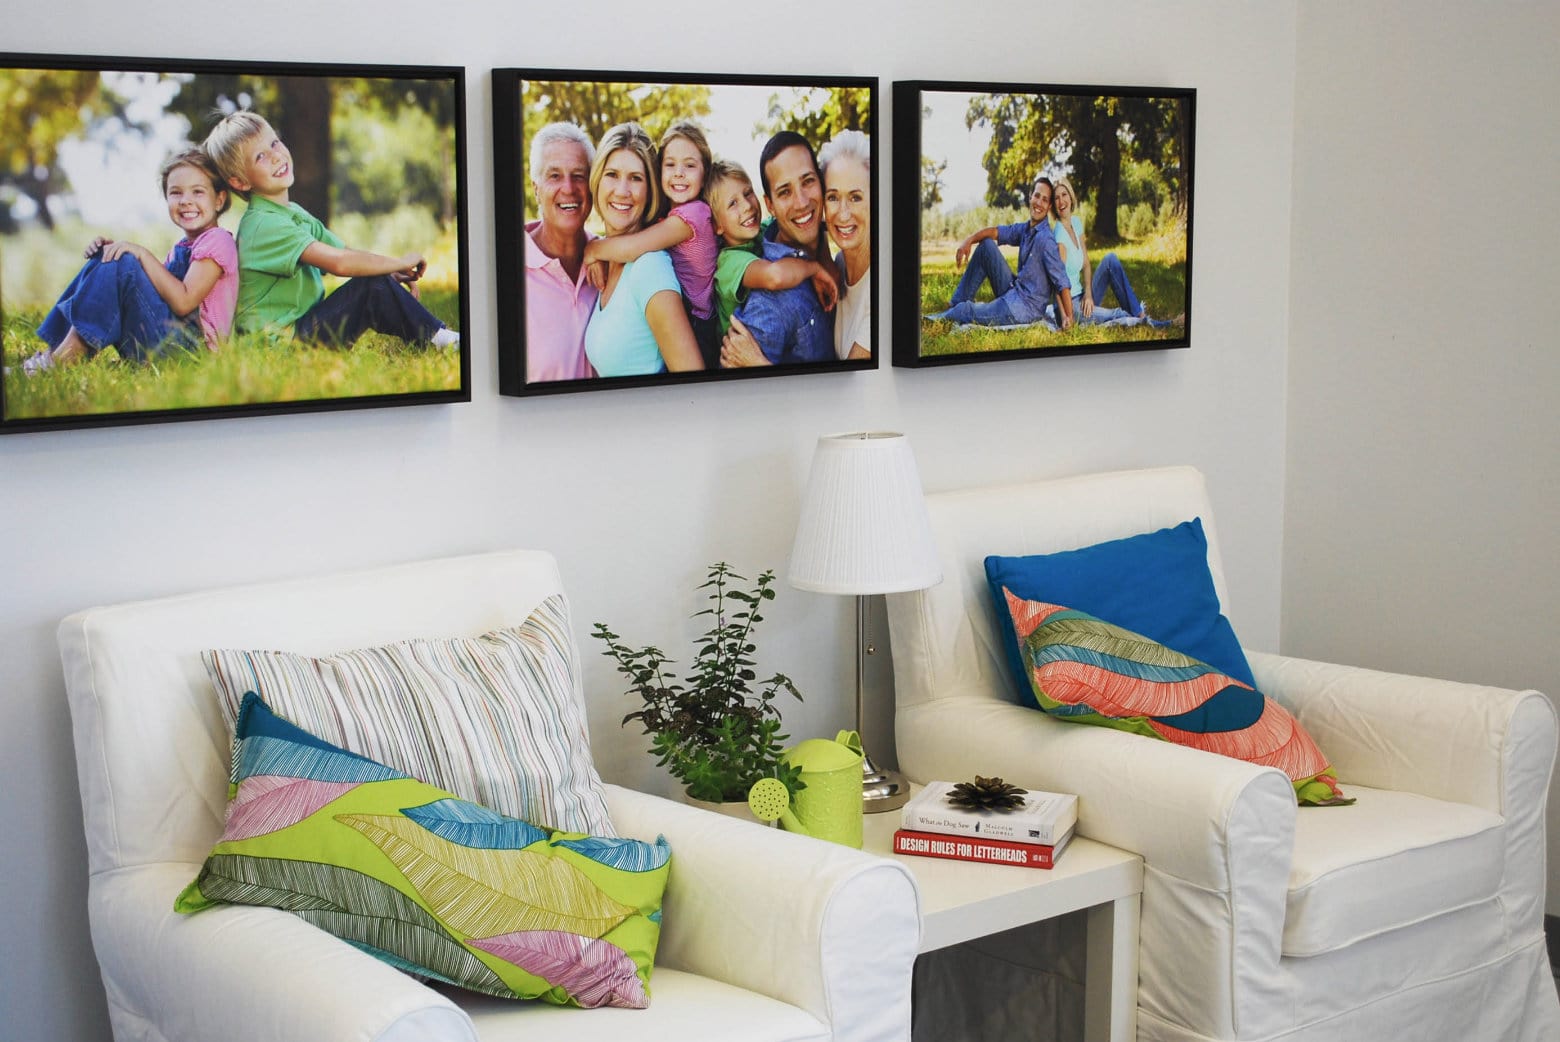 Framed Canvas Prints Displayed on the Wall with Family Photos Printed